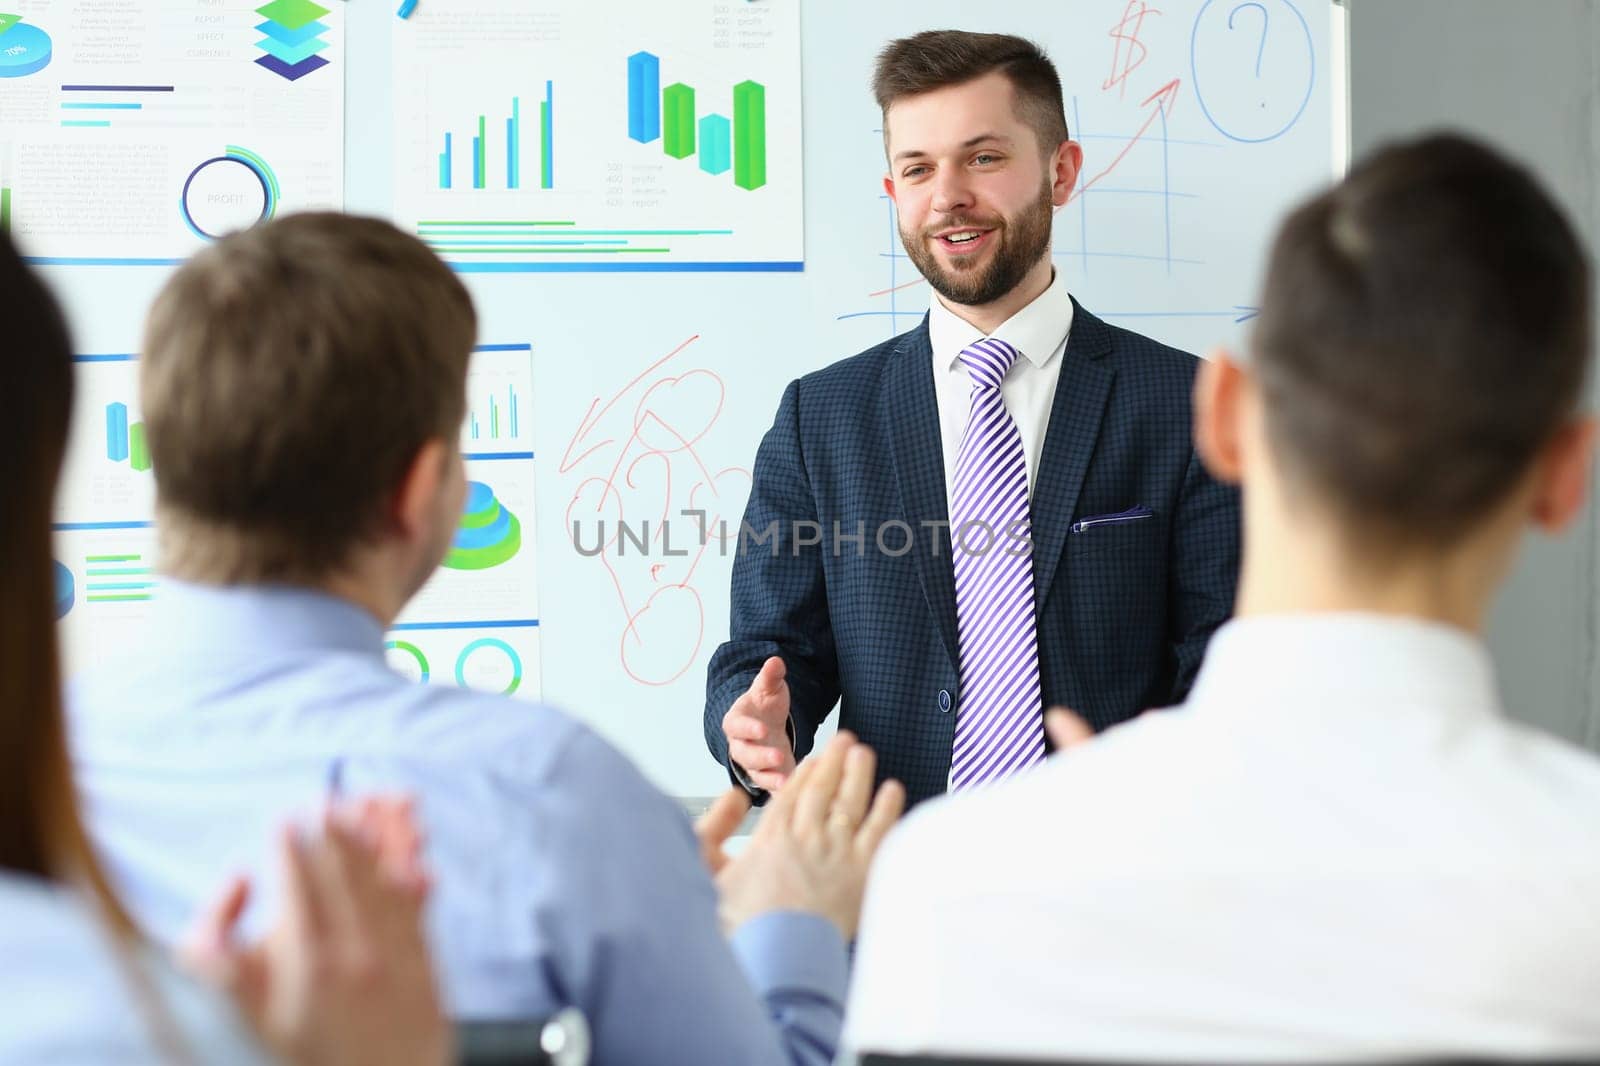 Male business coach speaker in suit makes presentation on white board. Male speaker advising on training and persuading client group employees